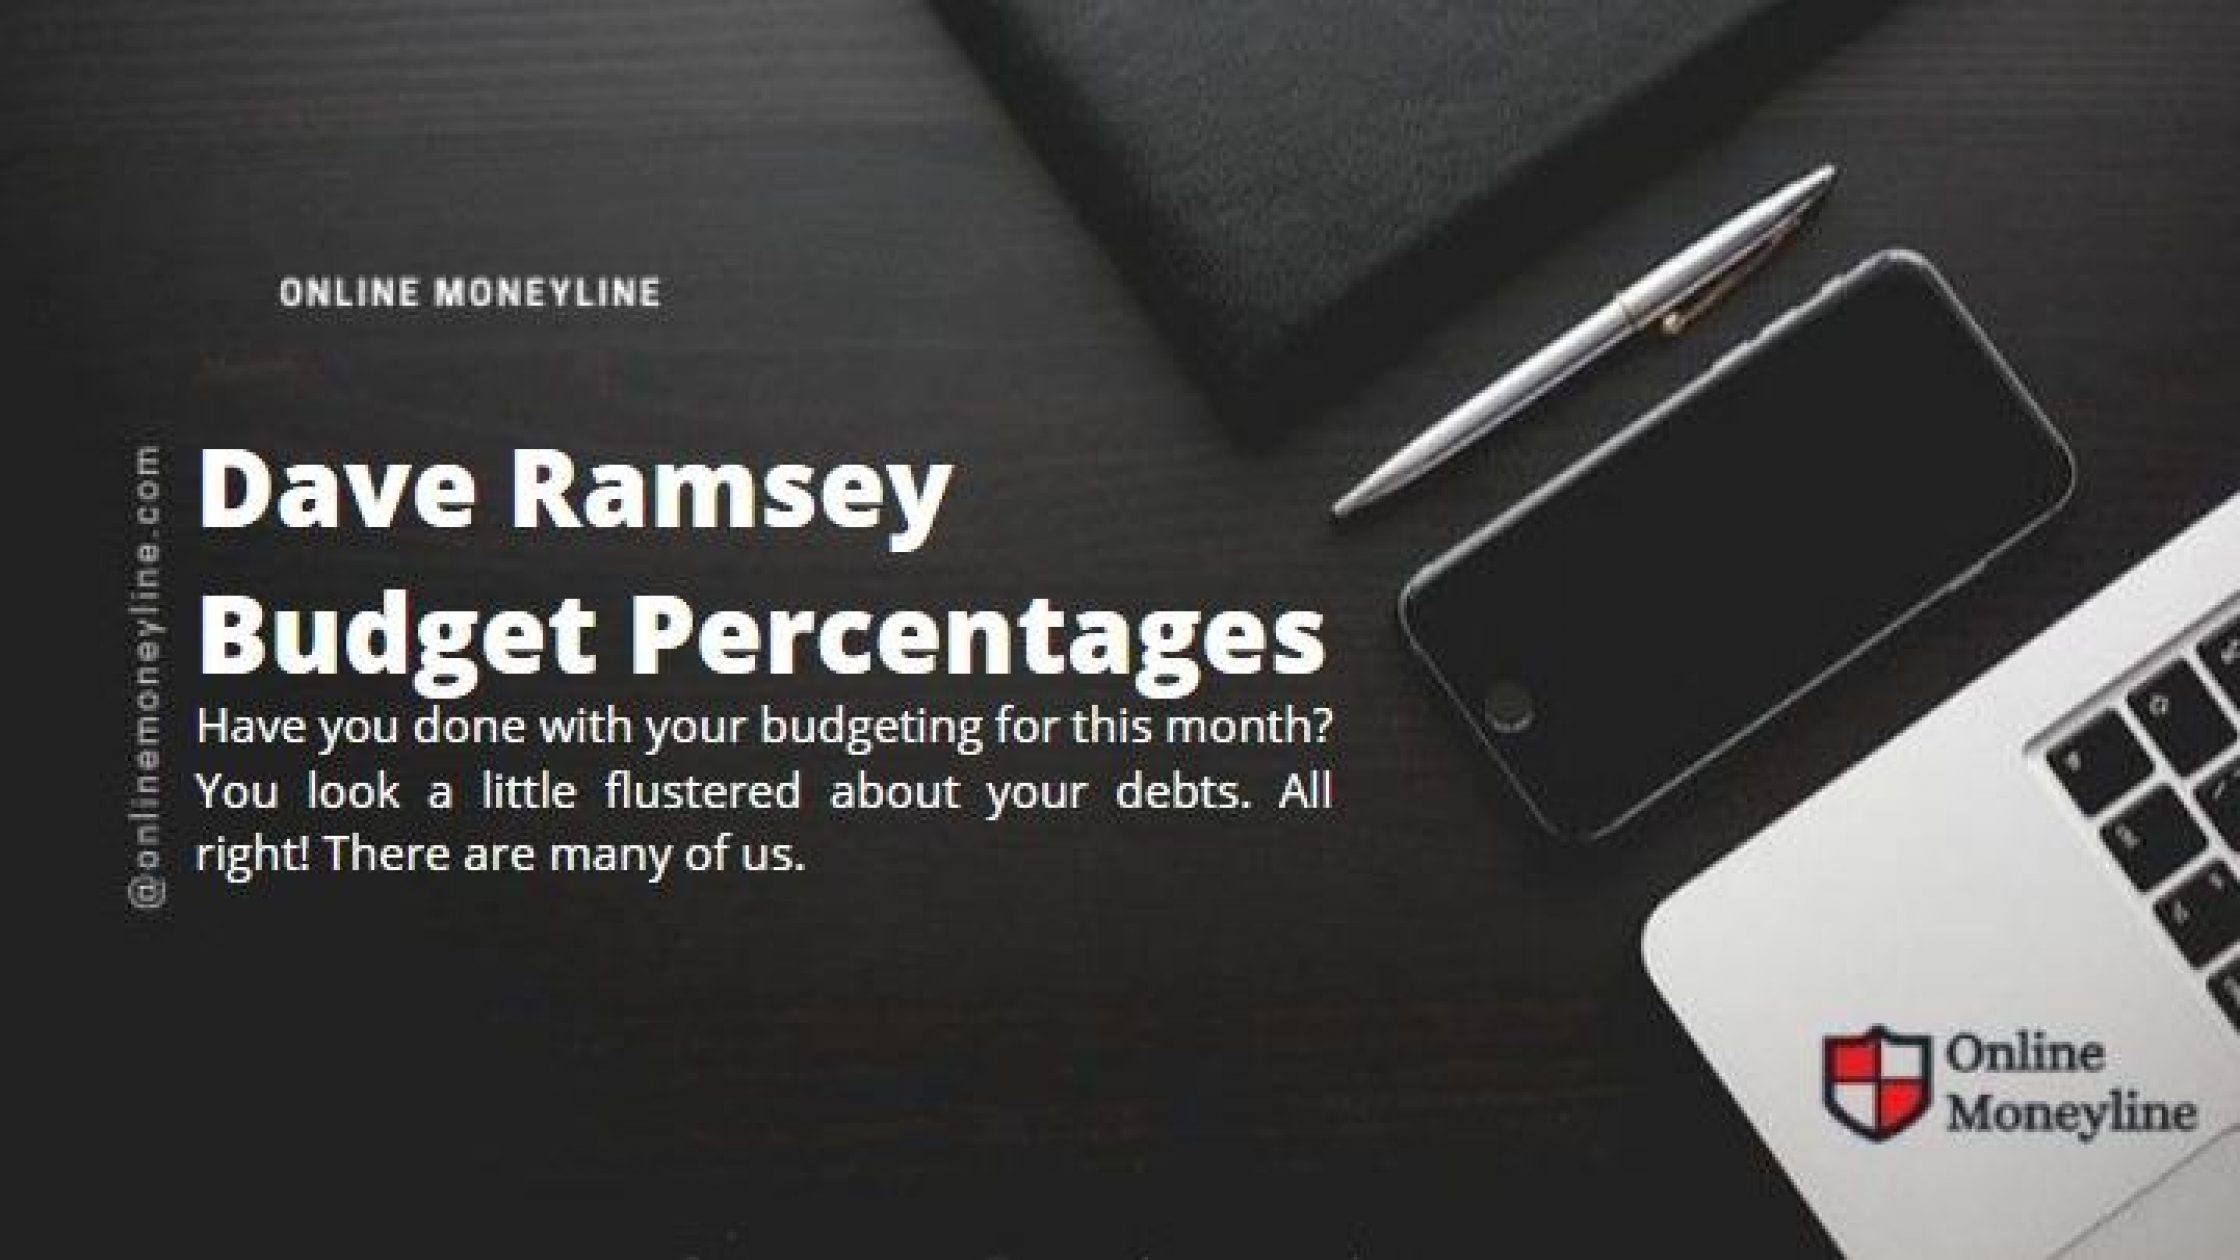 Dave Ramsey Budget Percentages